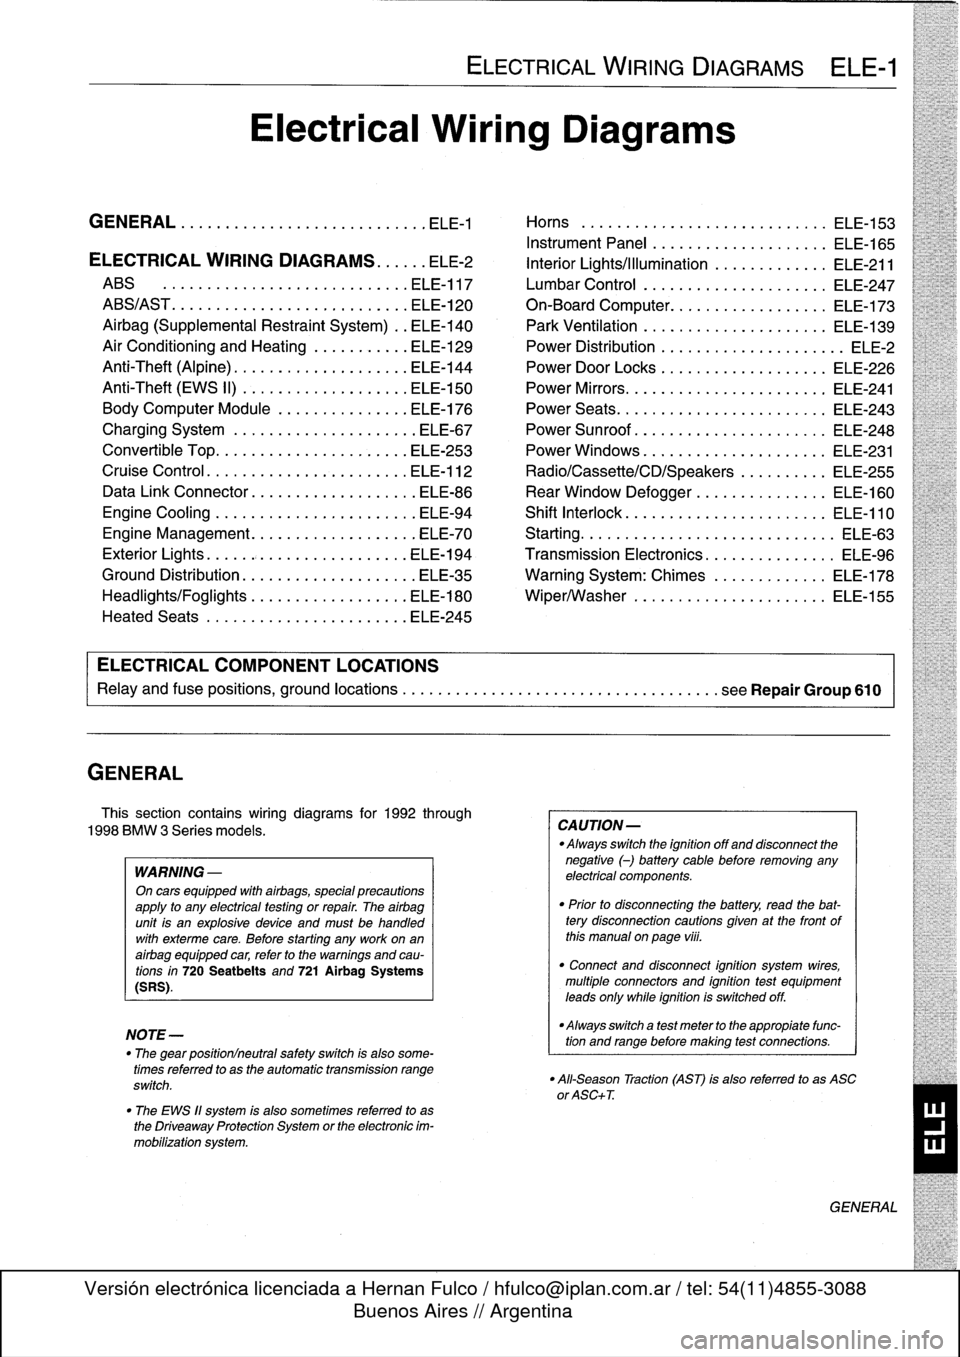 BMW 318i 1997 E36 Workshop Manual 
GENERAL

This
section
contains
wiring
diagrams
for
1992
through

1998
BMW
3
Series
models
.

WARNING
-

On
cars
equipped
with
airbags,
special
precautions
apply
to
any
electrical
testing
or
repair
.
